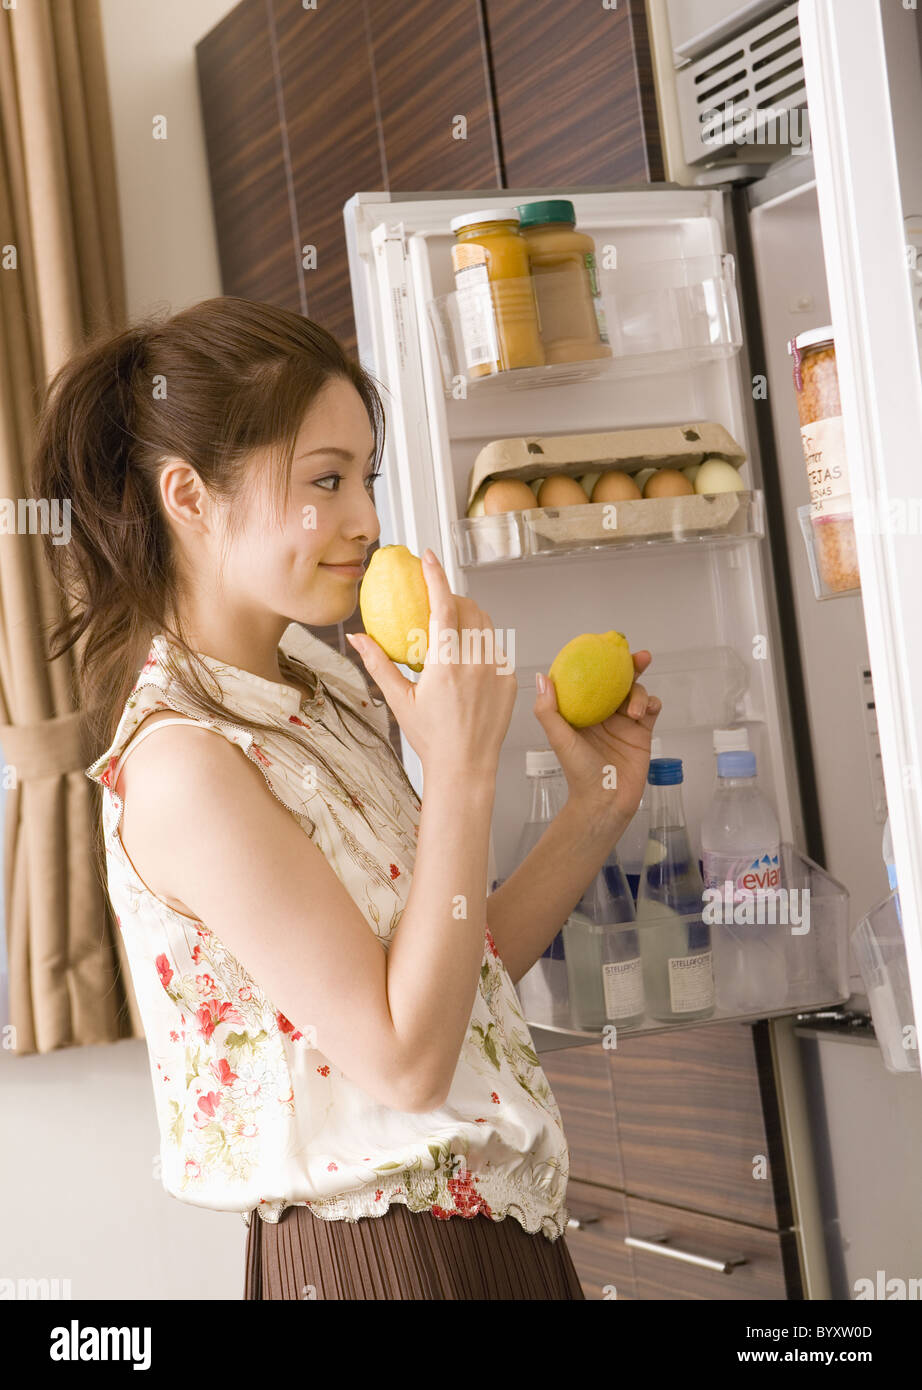 Woman selecting foods from fridge Stock Photo